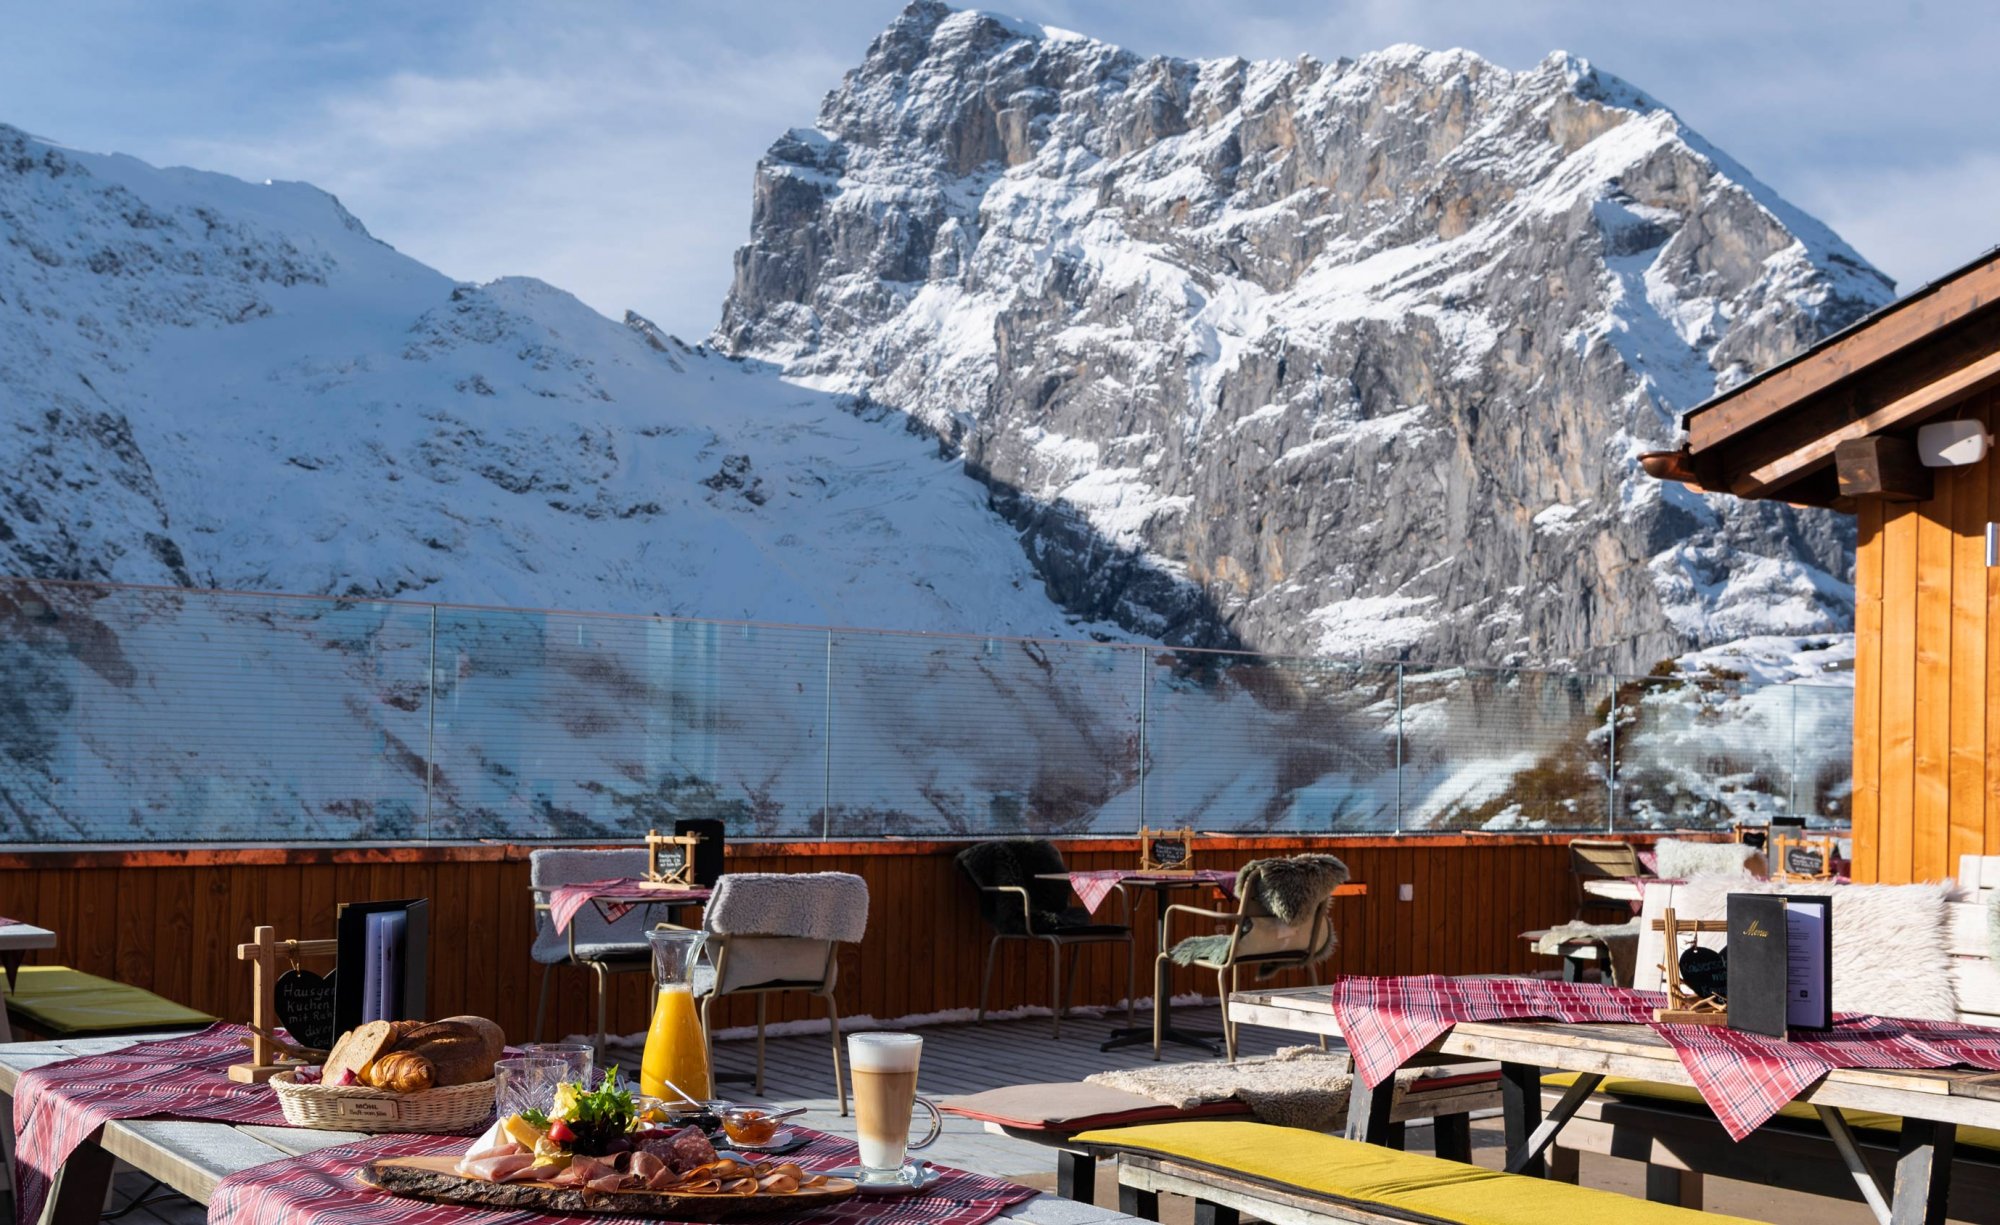 on the most beautiful sun terrace above Engelberg